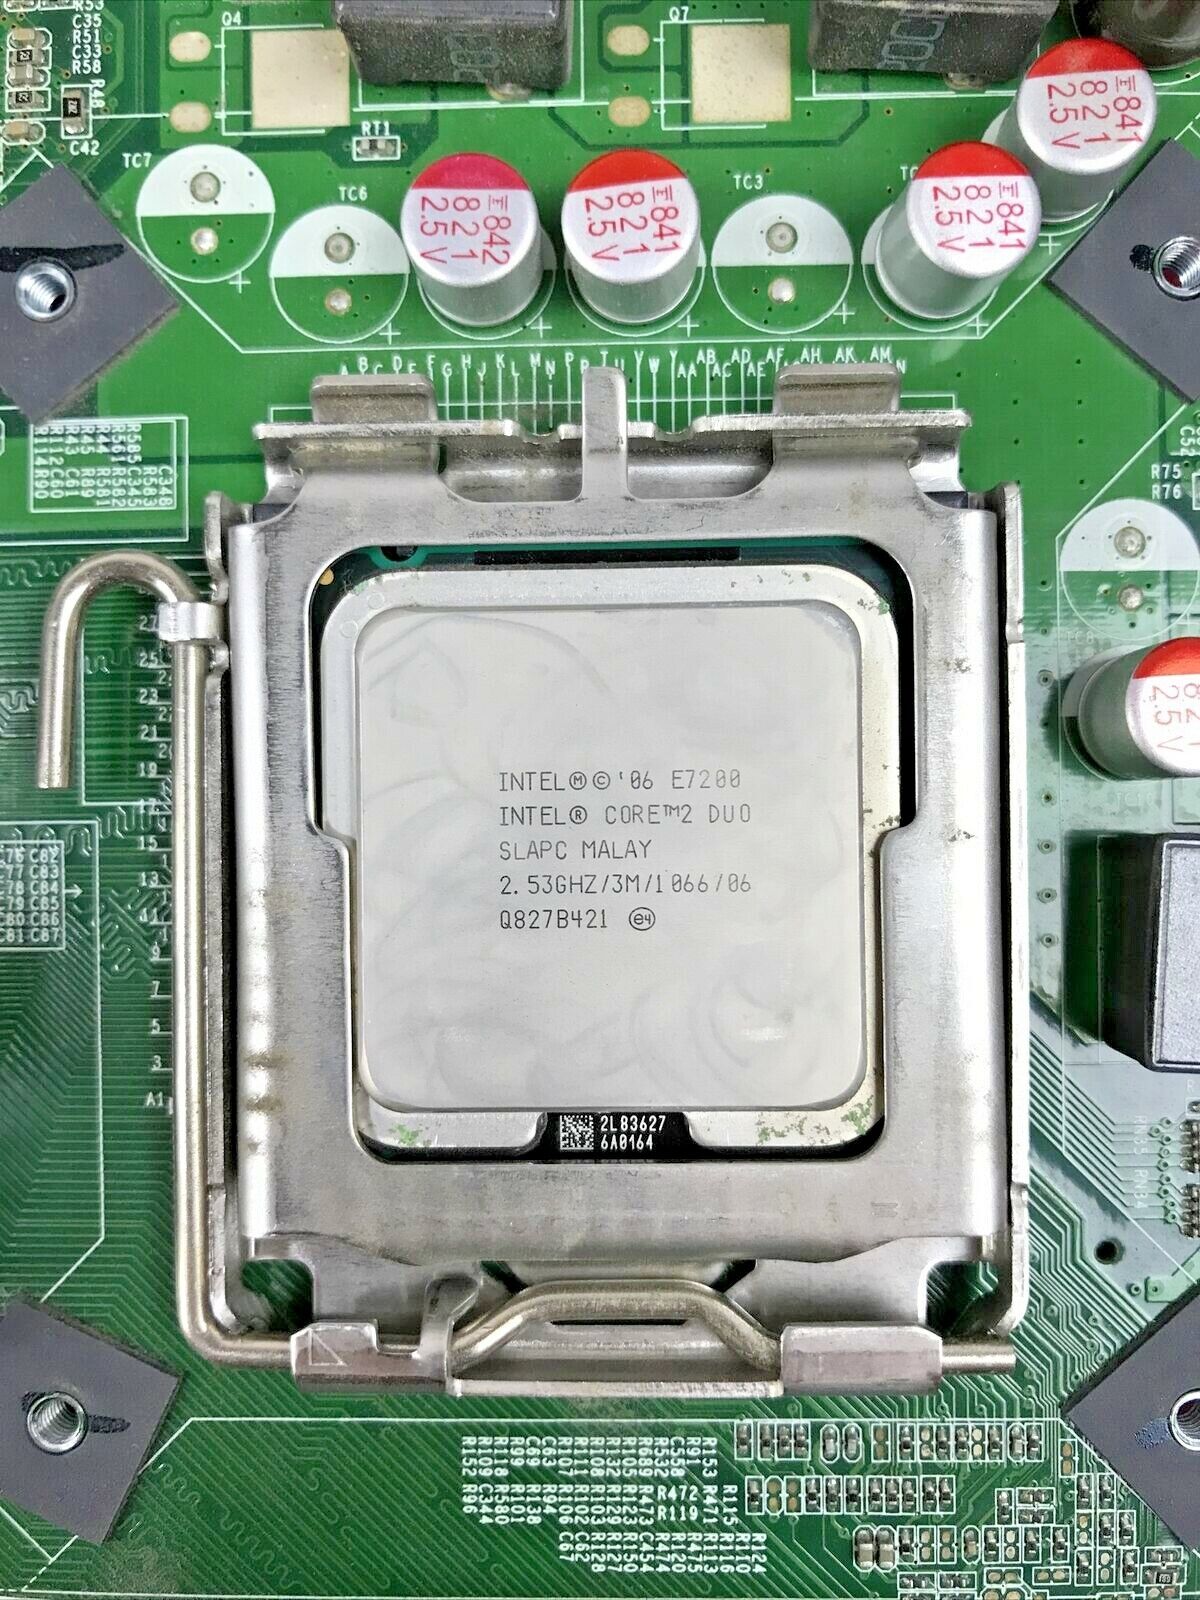 Dell 0RY007 Motherboard Intel Core 2 Duo E7200 2.53GHz 2GB RAM with I/O Shield